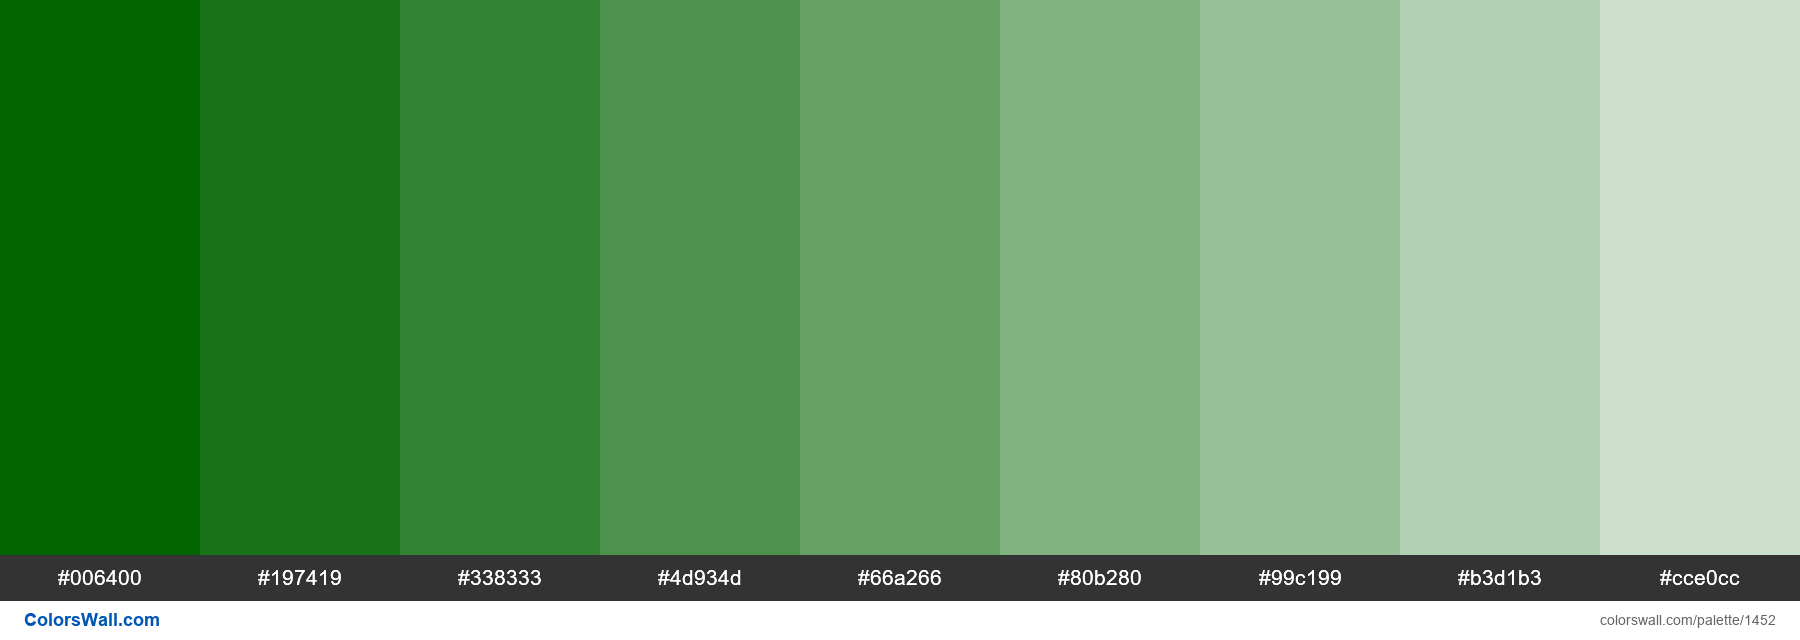 Shades of Dark Olive Green #556B2F hex color  Green colour palette, Hex  color palette, Hex colors